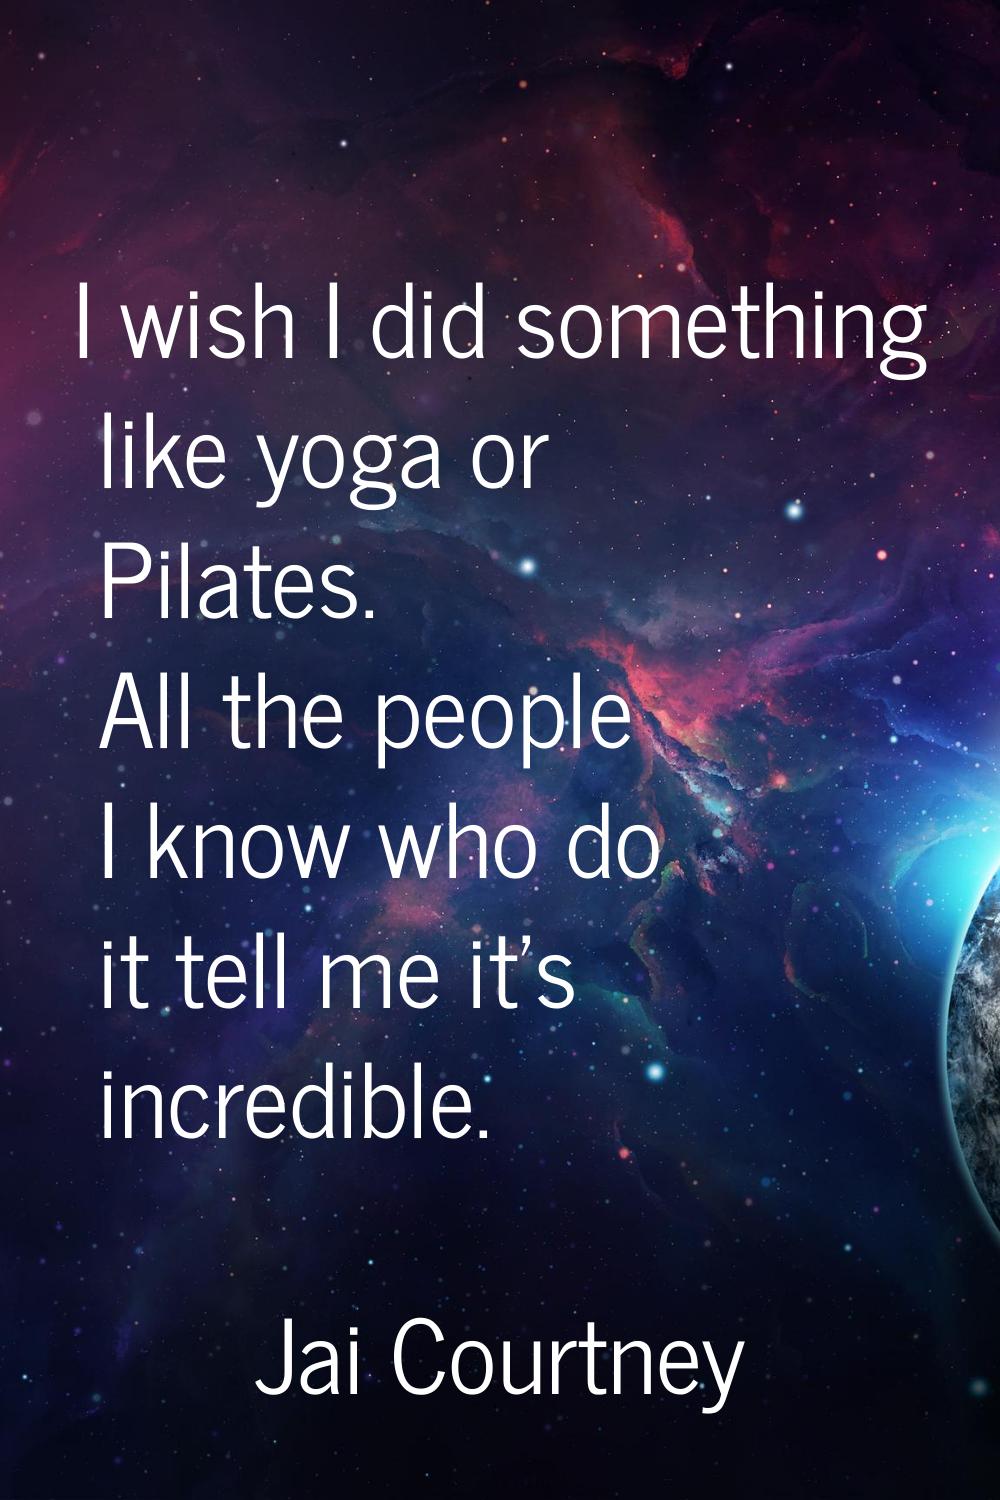 I wish I did something like yoga or Pilates. All the people I know who do it tell me it's incredibl